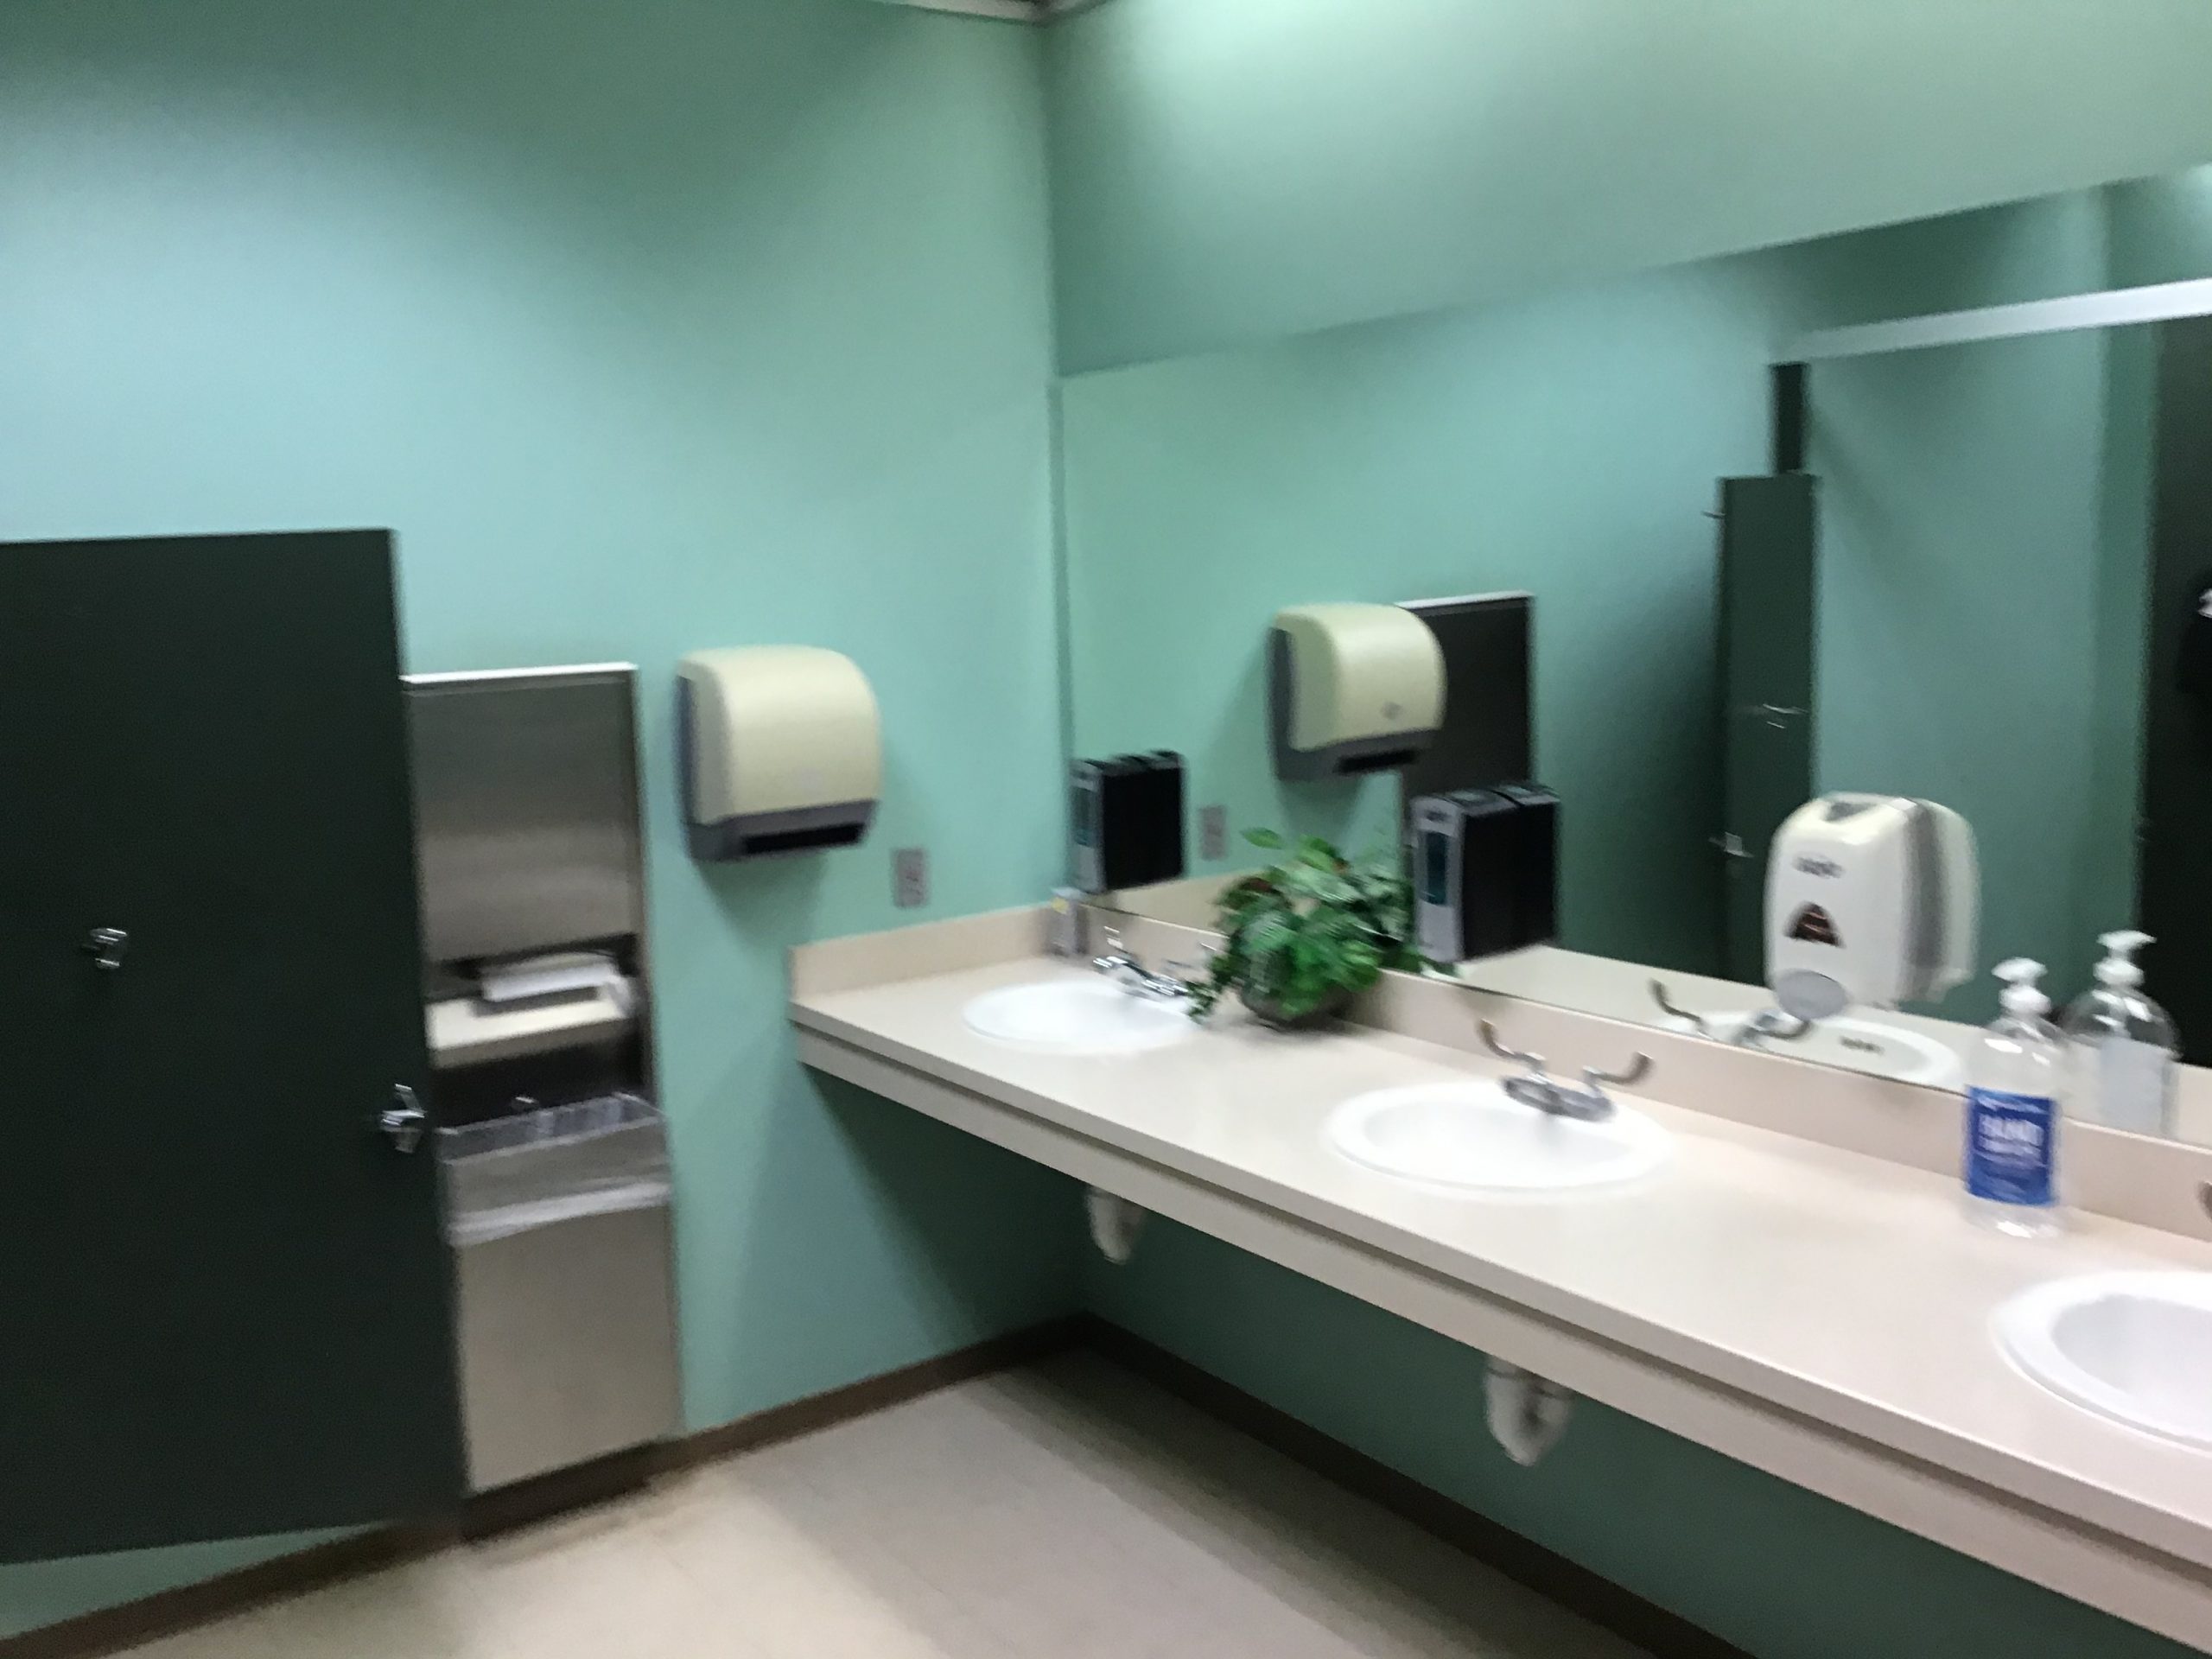 Commercial Bathroom Painting Project in Sugar Land After CertaPro Painters of Missouri City